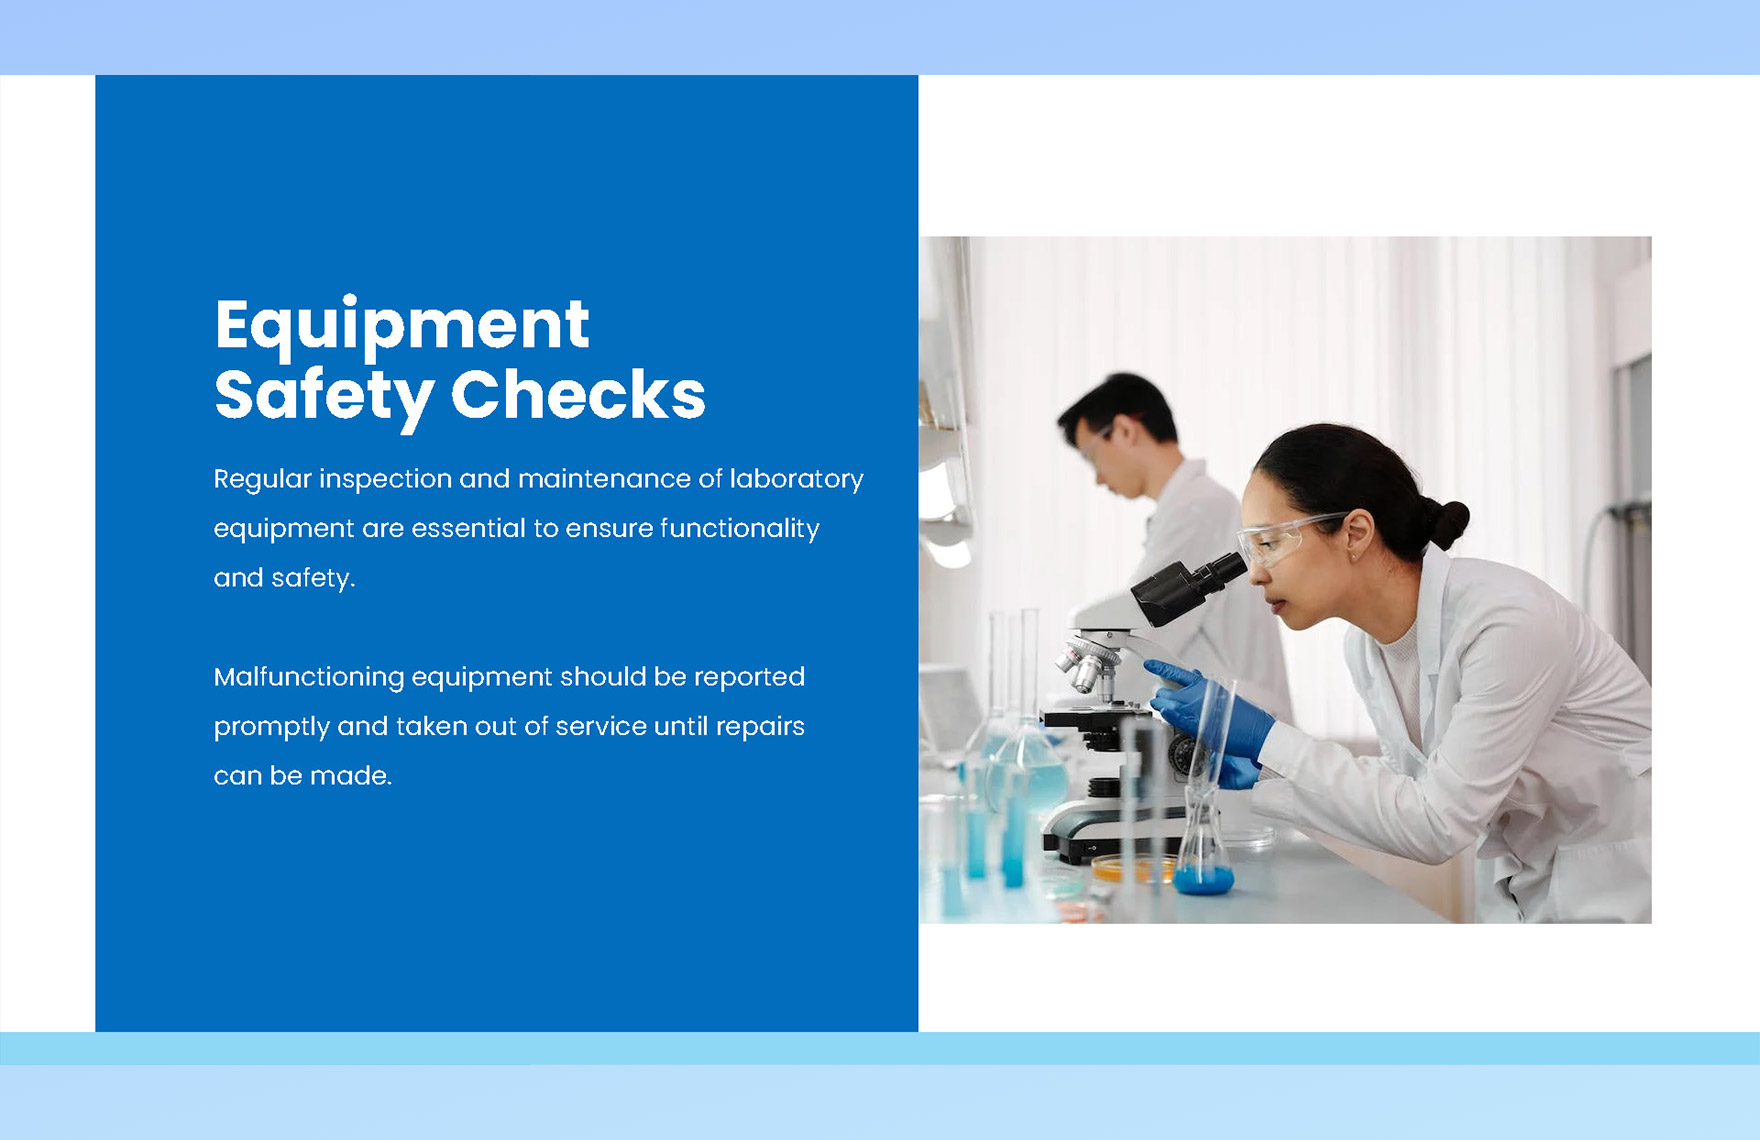 Health and Safety in the Laboratory Google Slides Template